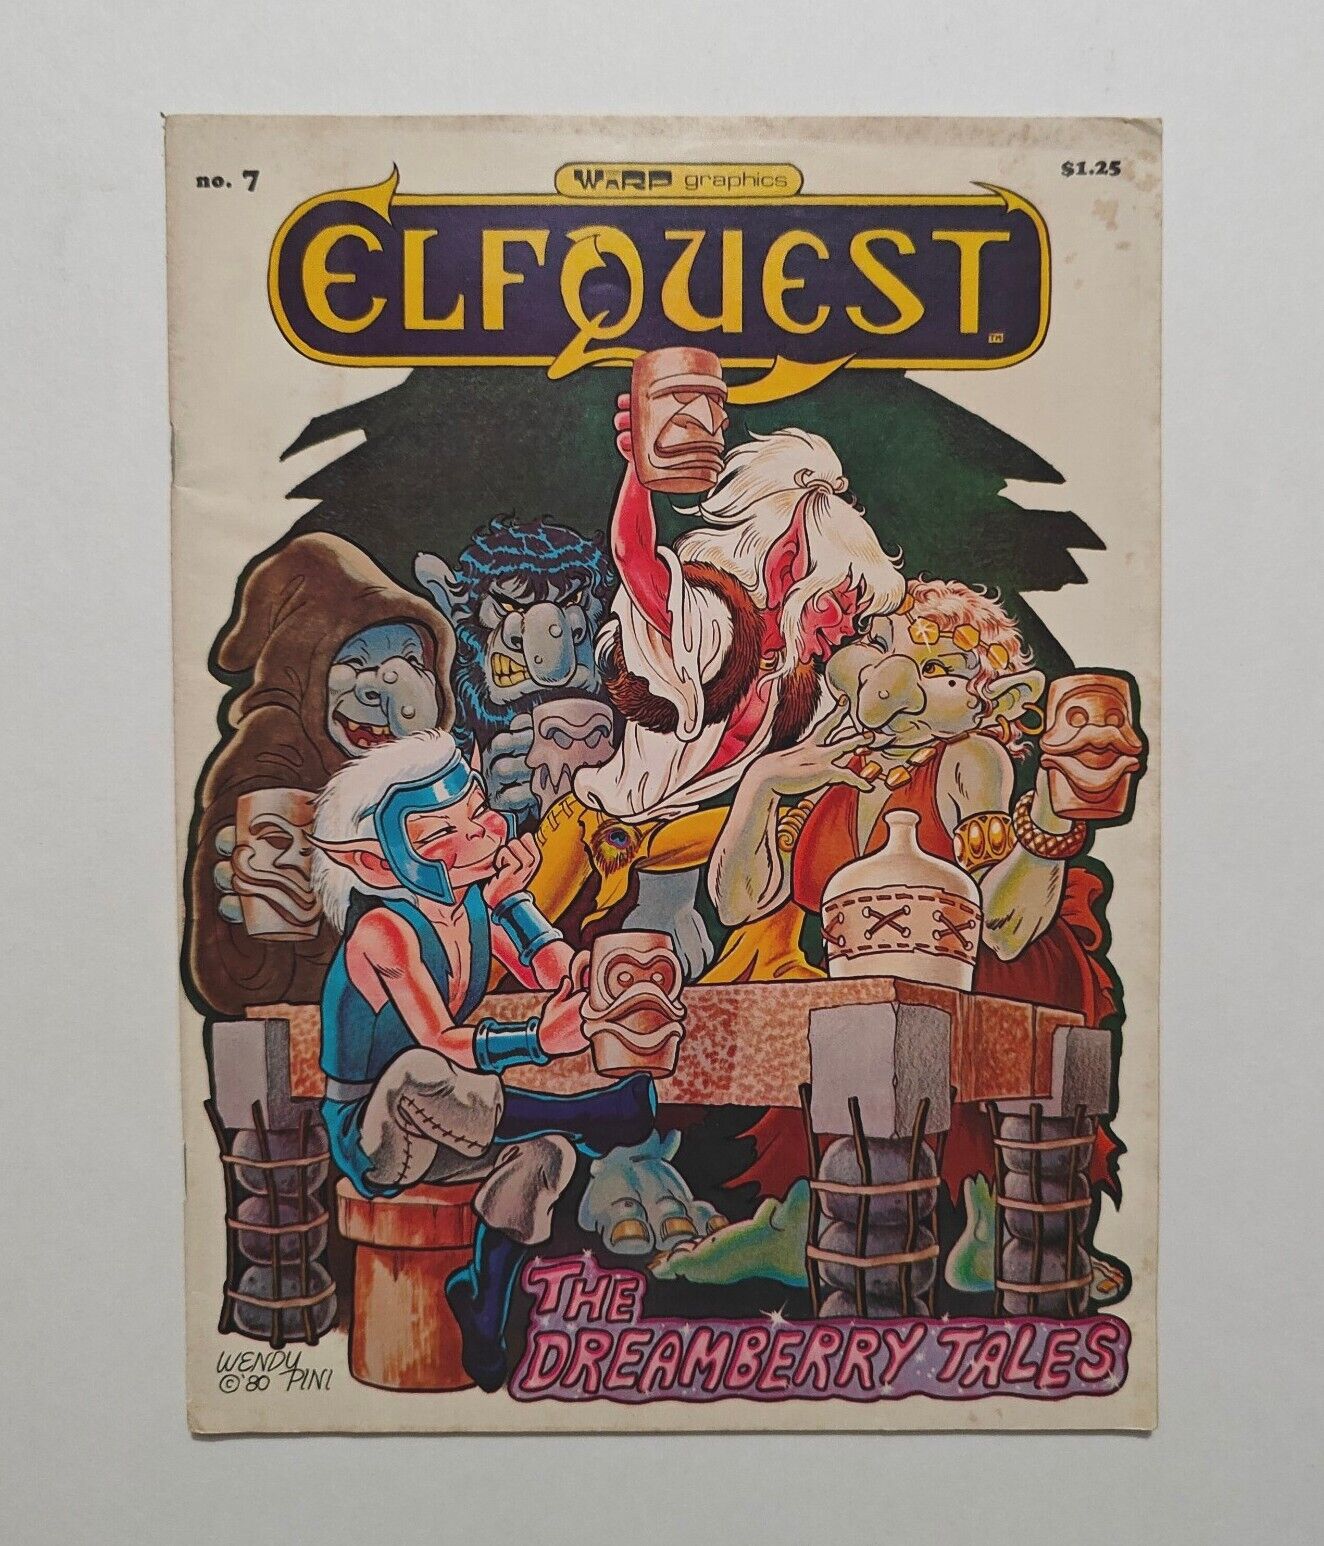 ELFQUEST Vol. 1 #7 by Richard & Wendy Pini Warp Graphics 1980 Dreamberry Tales